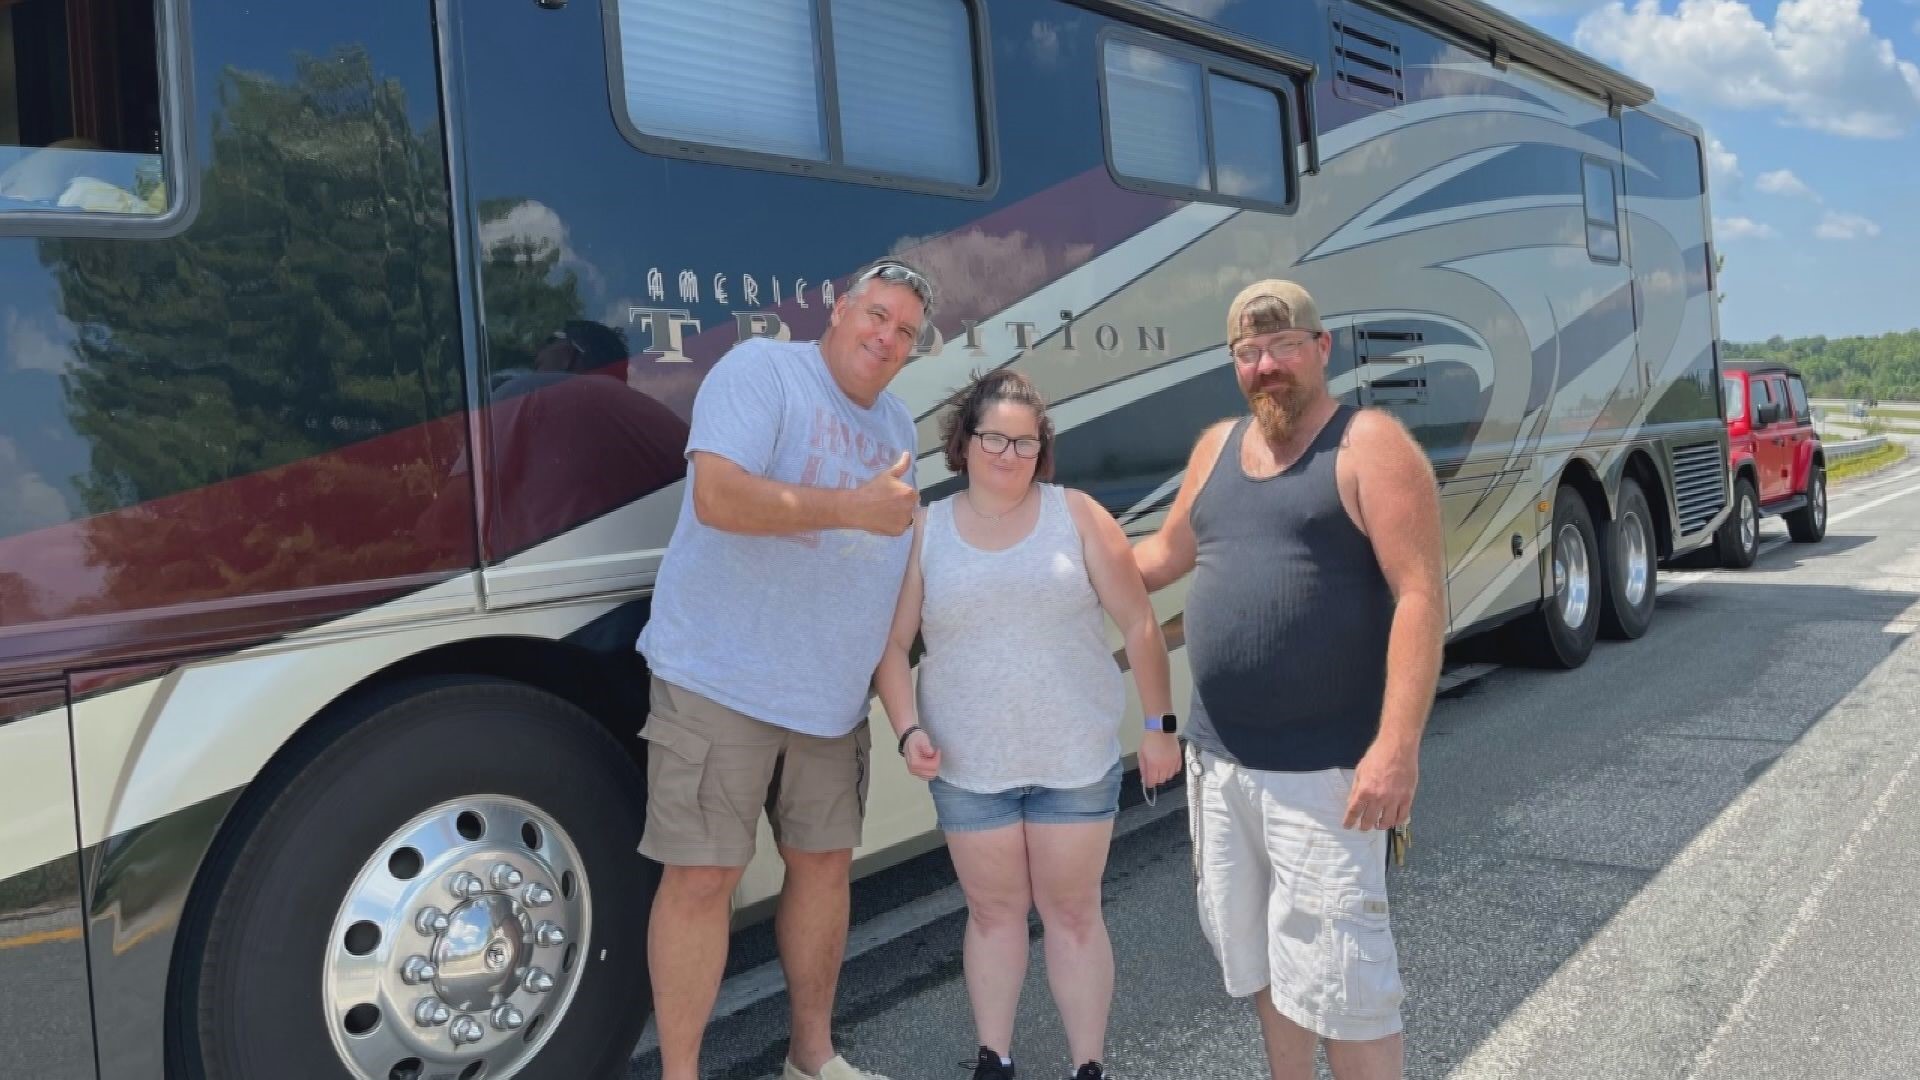 Cooperstown is the center of baseball's universe, but it is NOT an easy place to get to. Kent Hrbek decided an epic RV road trip was the best bet.